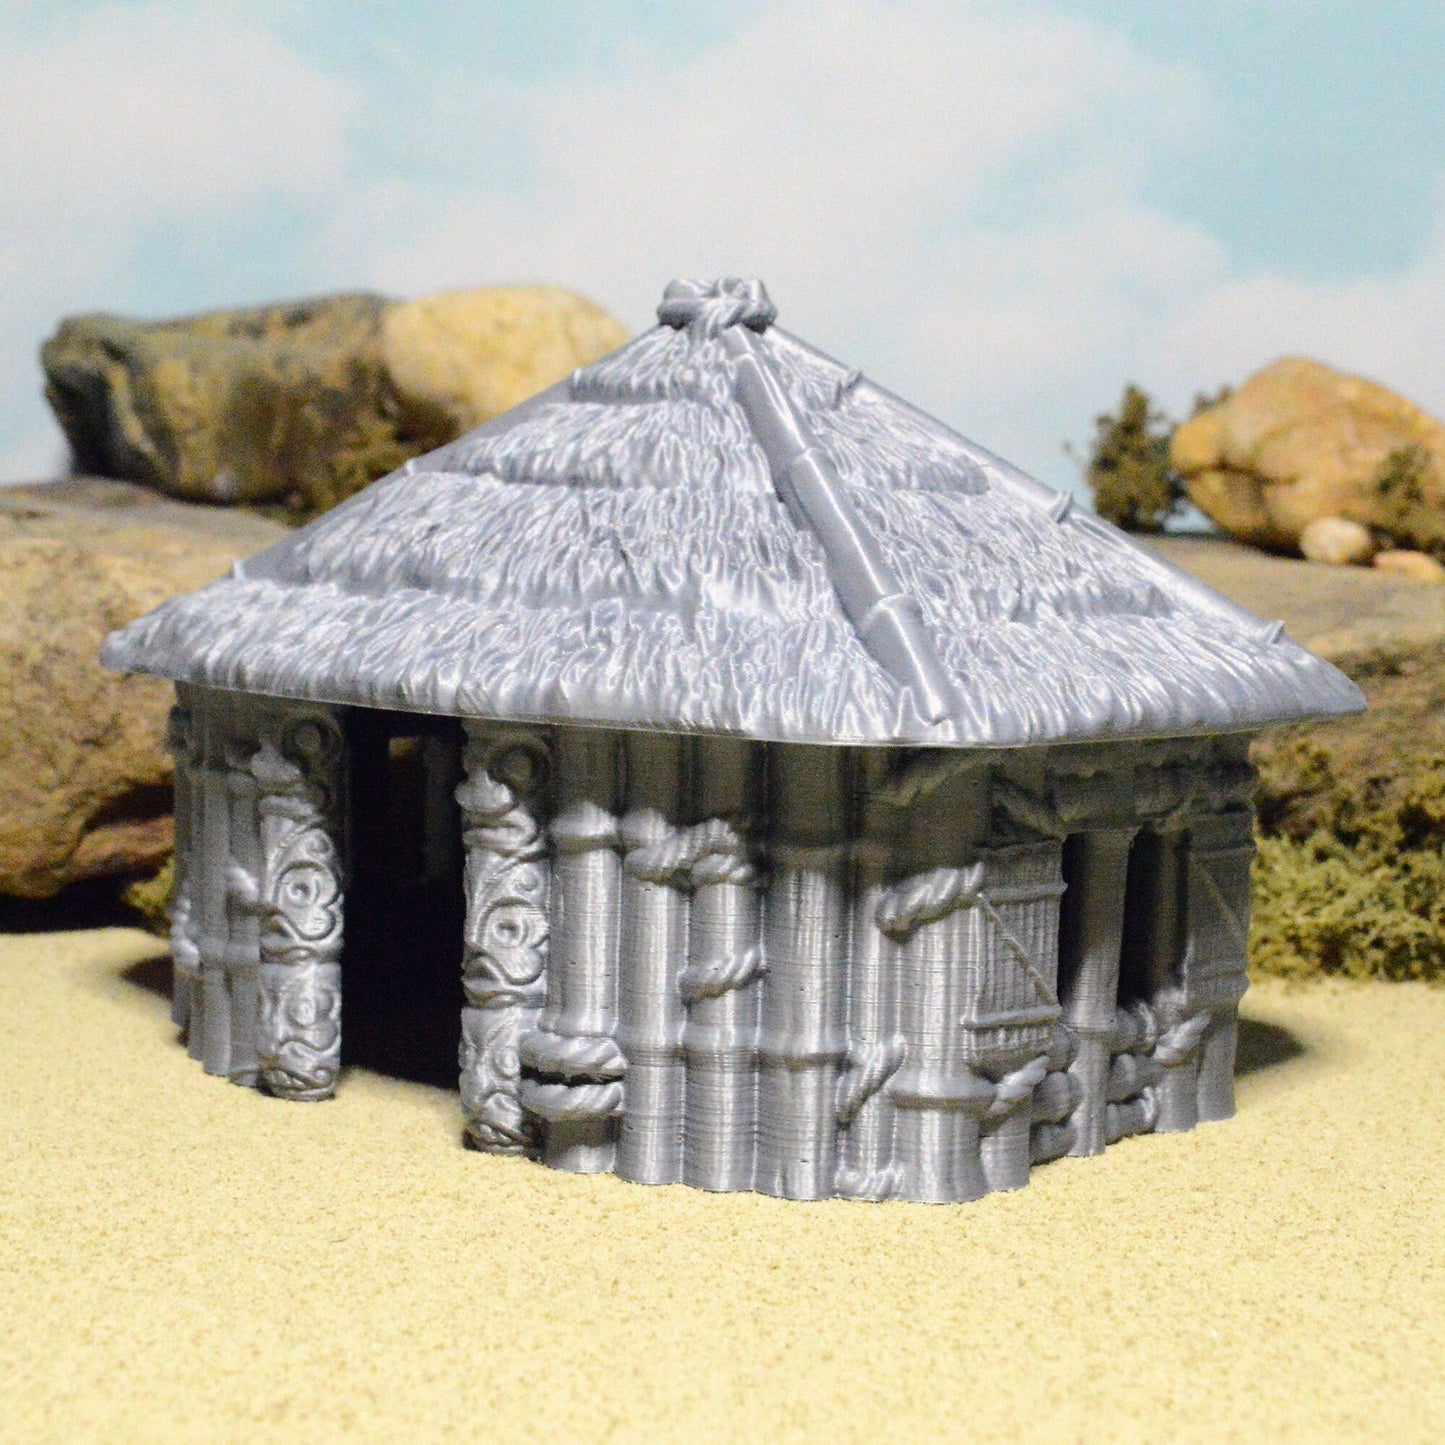 Bamboo Hut Large 15mm 28mm 32mm for D&D Terrain, DnD Pathfinder Tribal Coastal, Depths of Savage Atoll